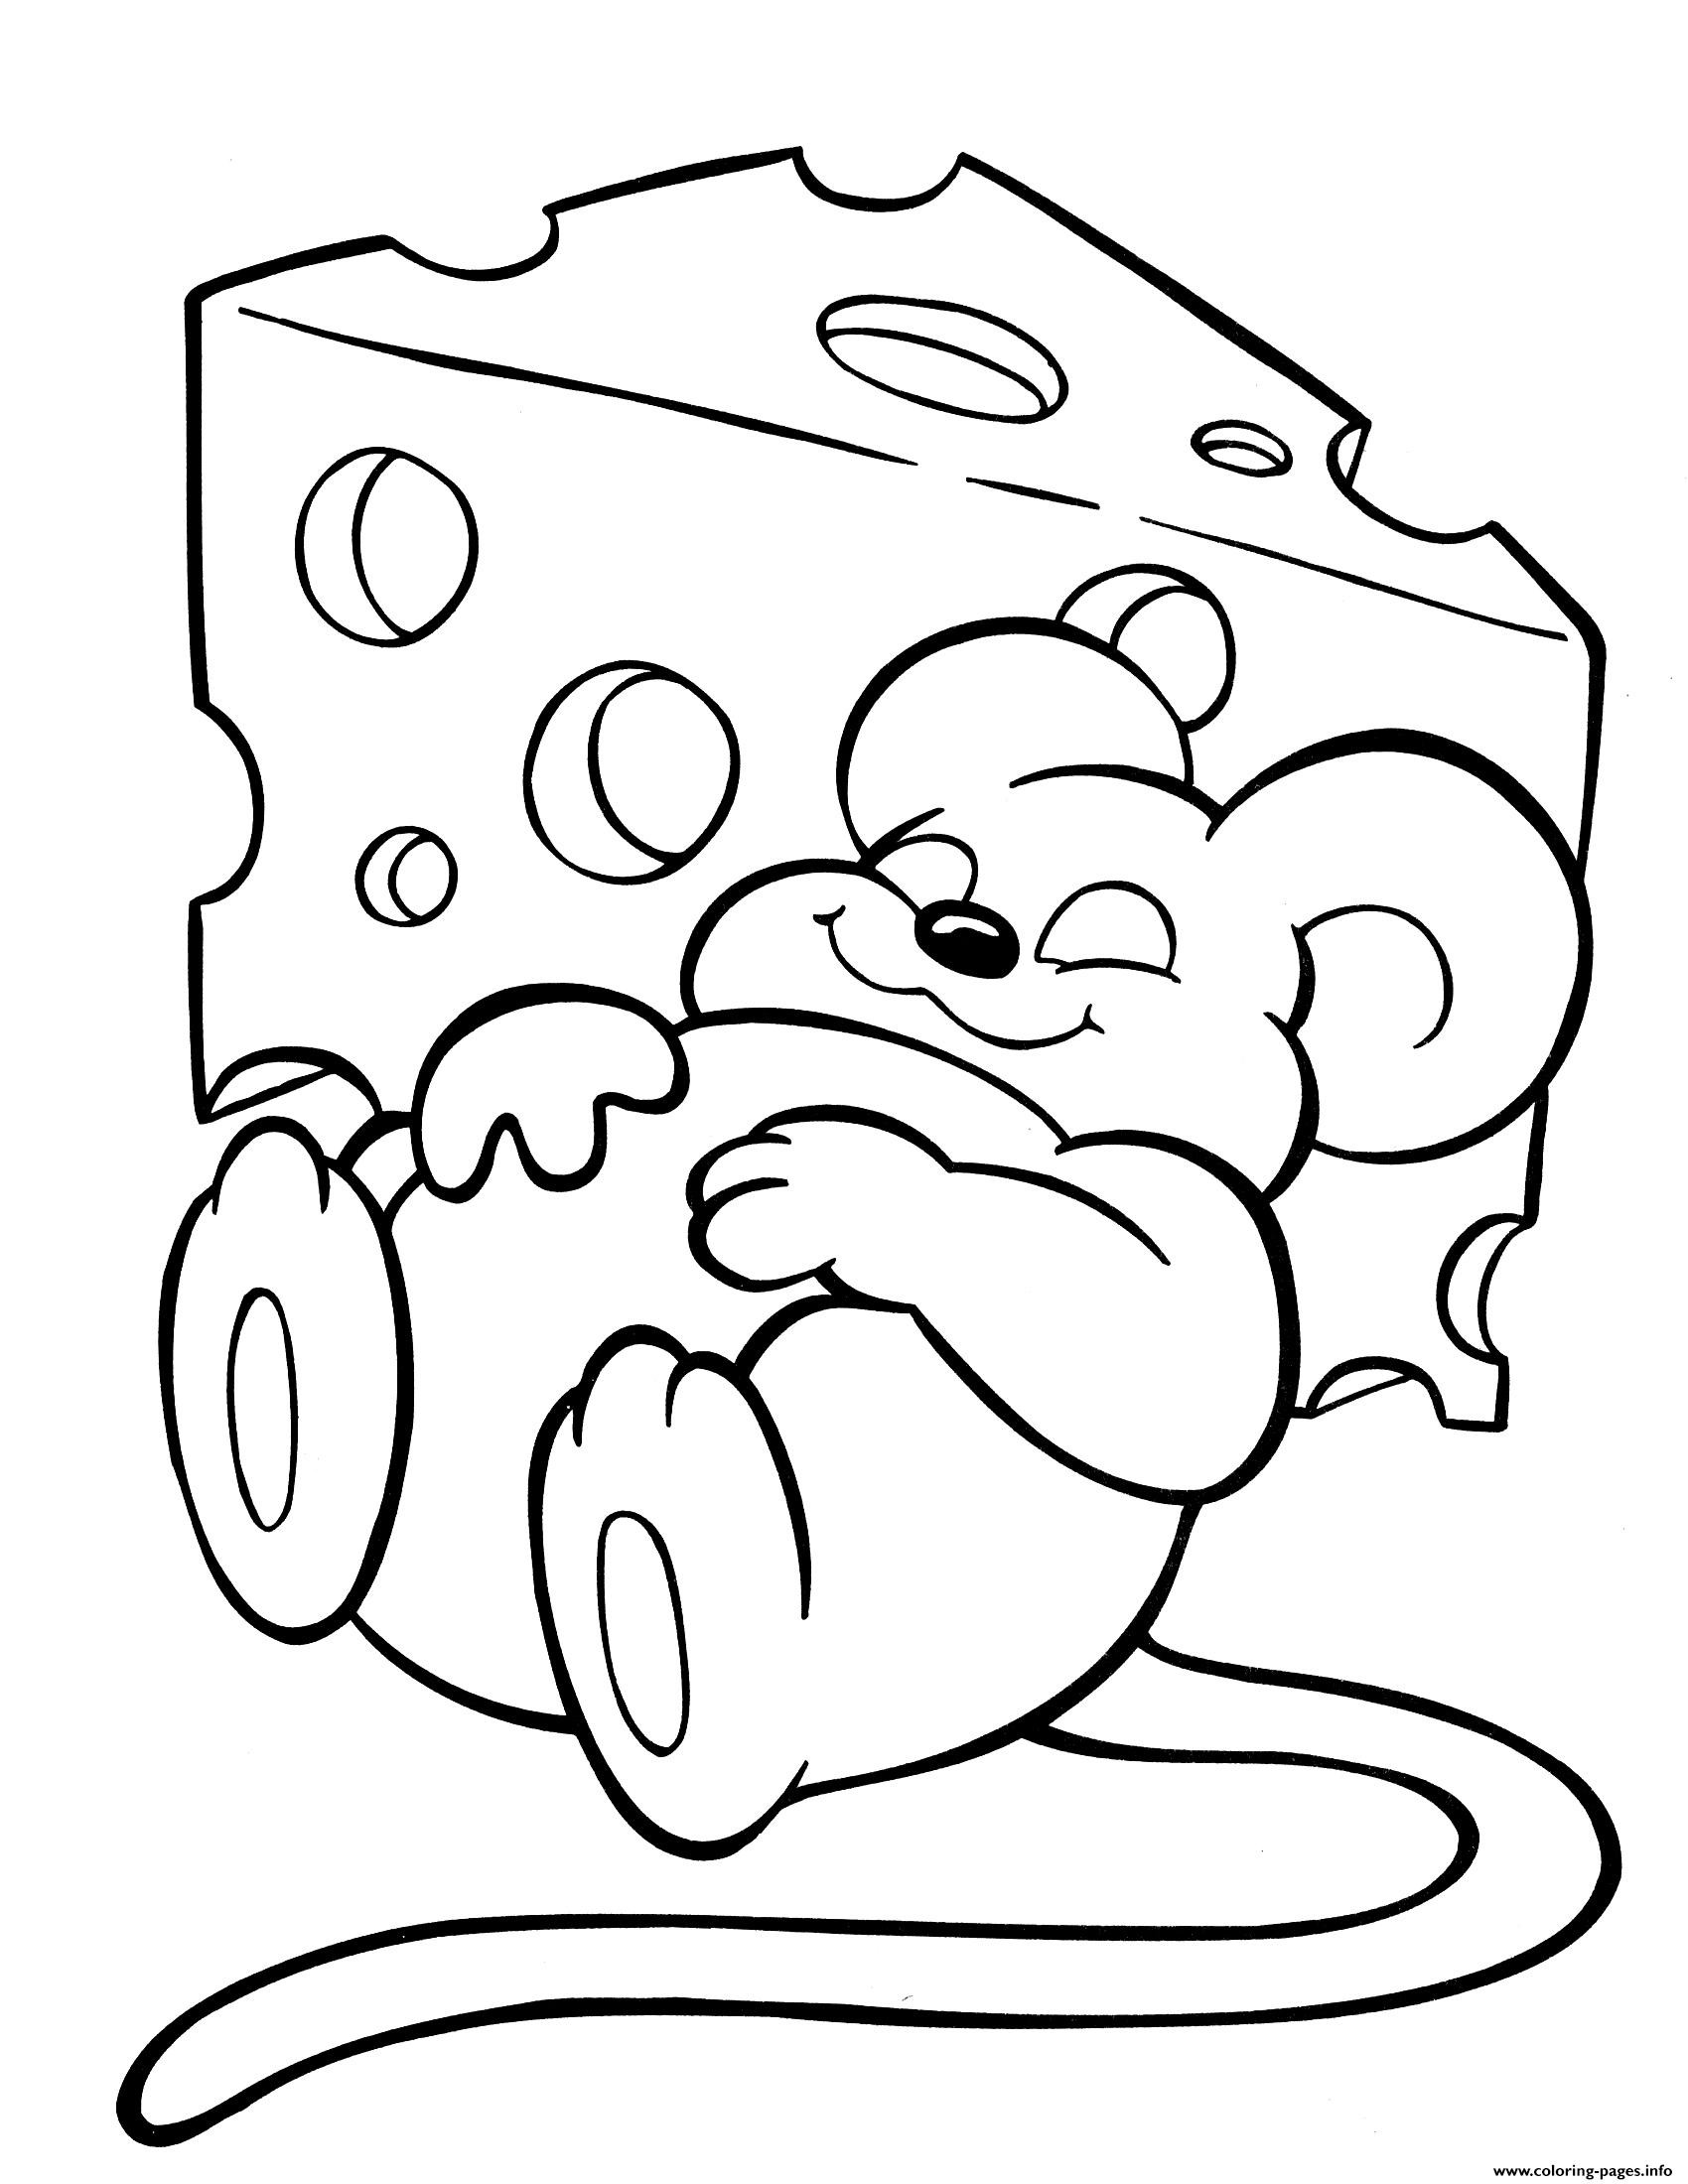 Crayola Coloring Pages For Girls
 Crayola Mouse Love Cheese Coloring Pages Printable